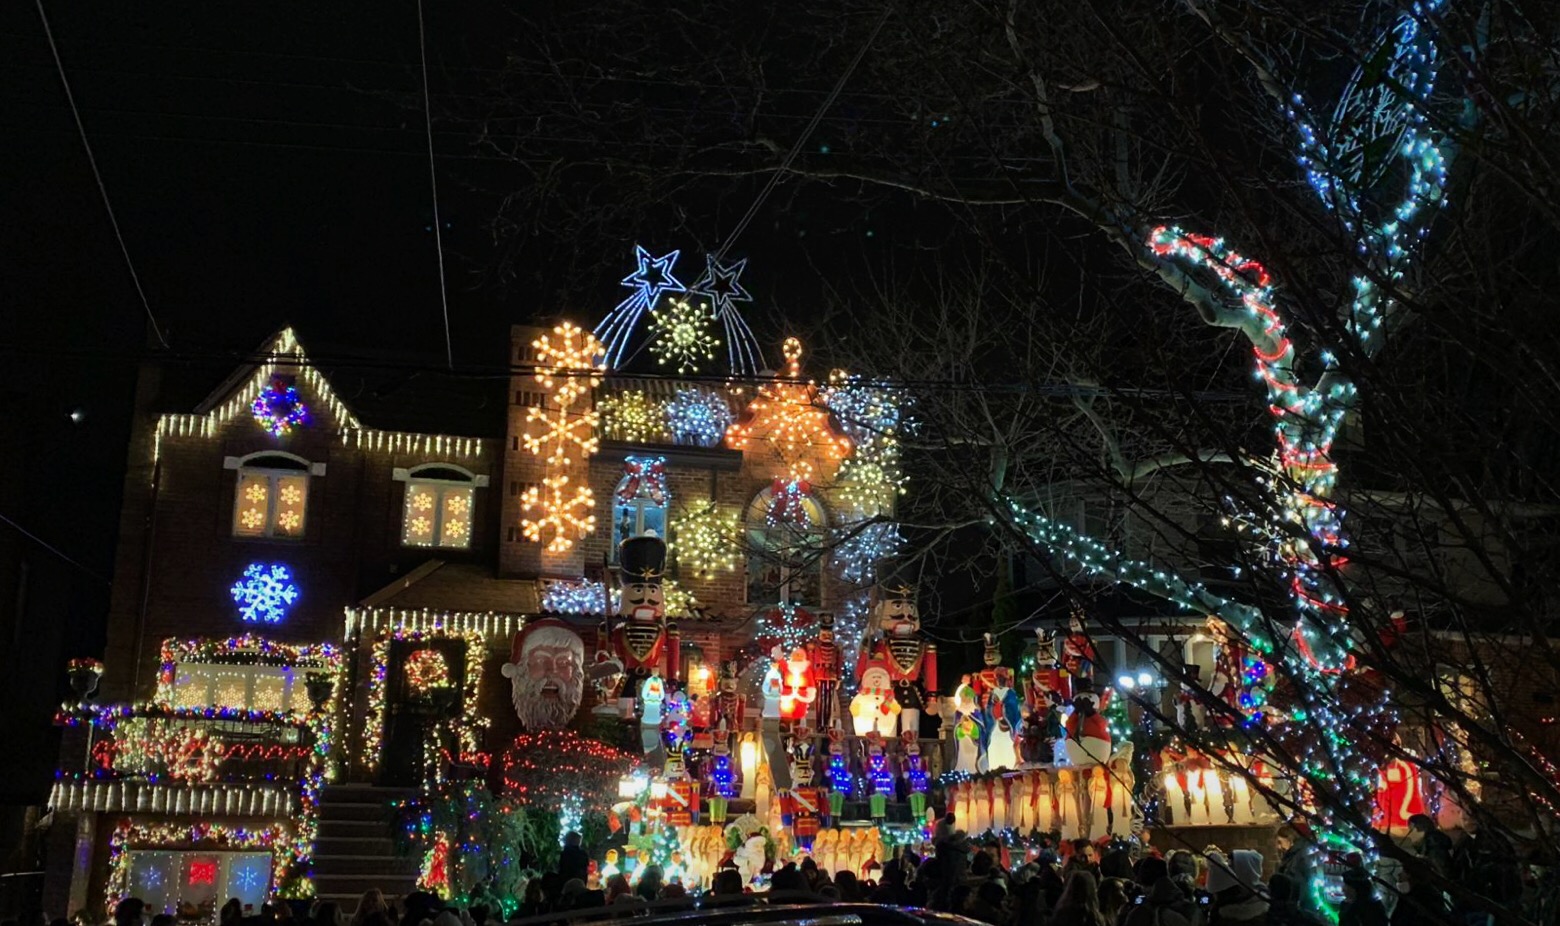 Dyker Heights - Christmas lights paradise! - Architect US